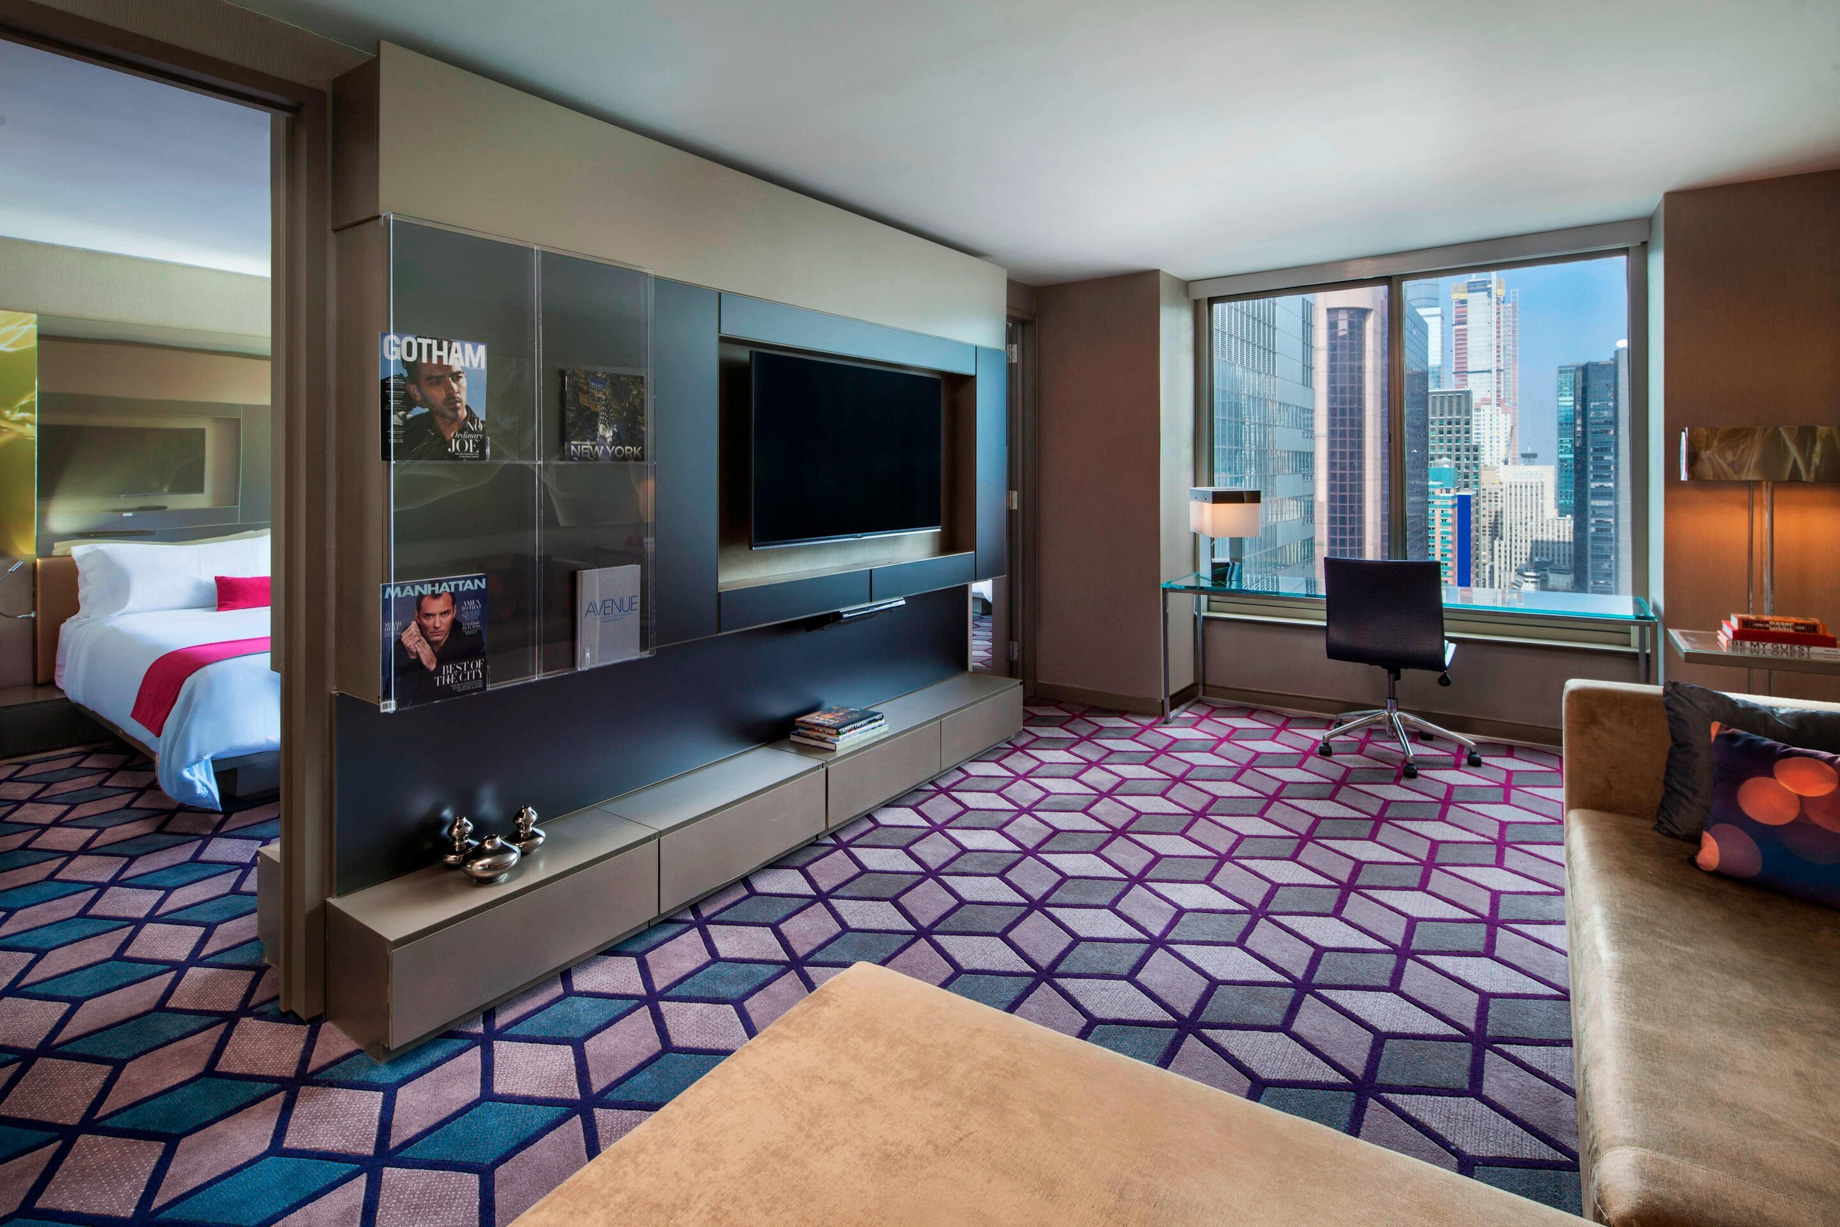 W New York Times Square Hotel - New York, NY, USA - Marvelous Suite